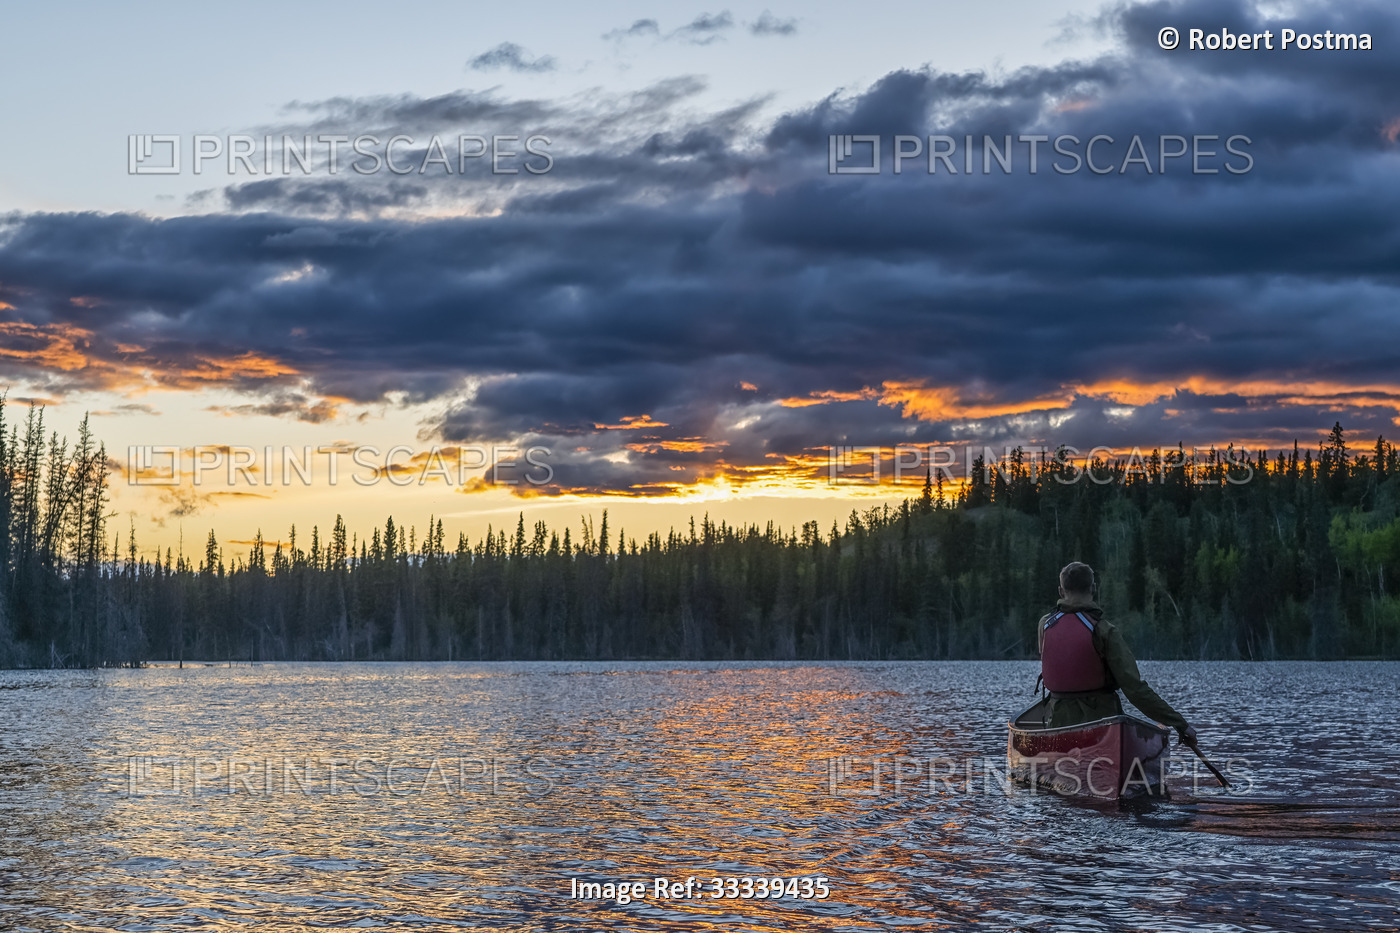 View taken from behind of person canoeing at sunset on a lake near Whitehorse; ...